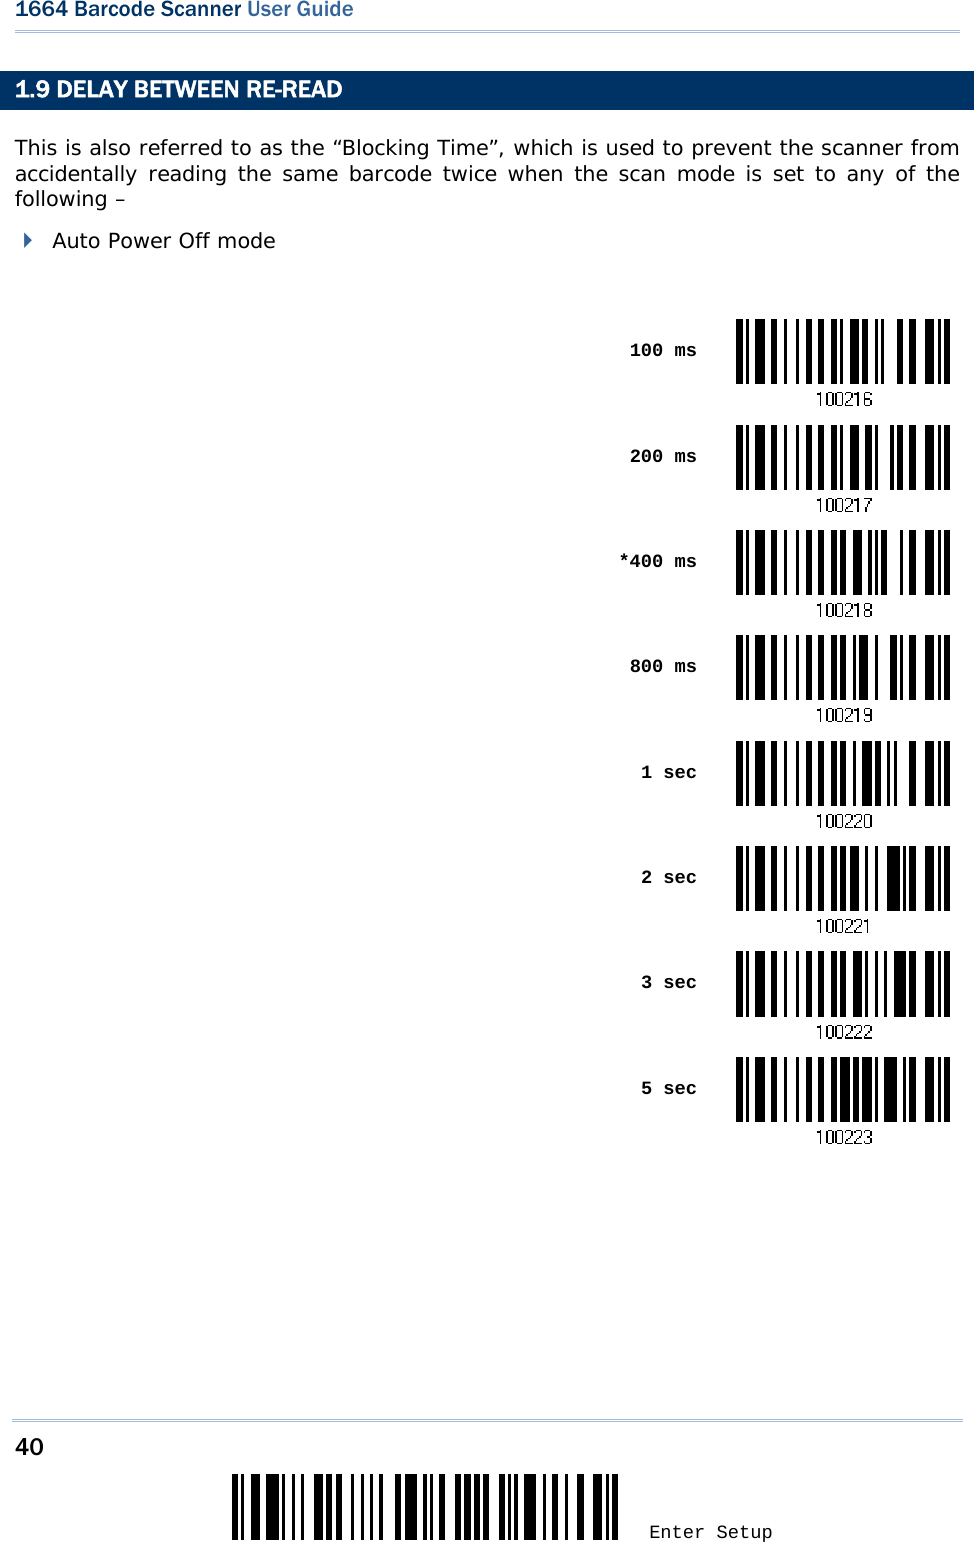 40 Enter Setup 1664 Barcode Scanner User Guide  1.9 DELAY BETWEEN RE-READ This is also referred to as the “Blocking Time”, which is used to prevent the scanner from accidentally reading the same barcode twice when the scan mode is set to any of the following –   Auto Power Off mode   100 ms 200 ms *400 ms 800 ms 1 sec 2 sec 3 sec 5 sec  